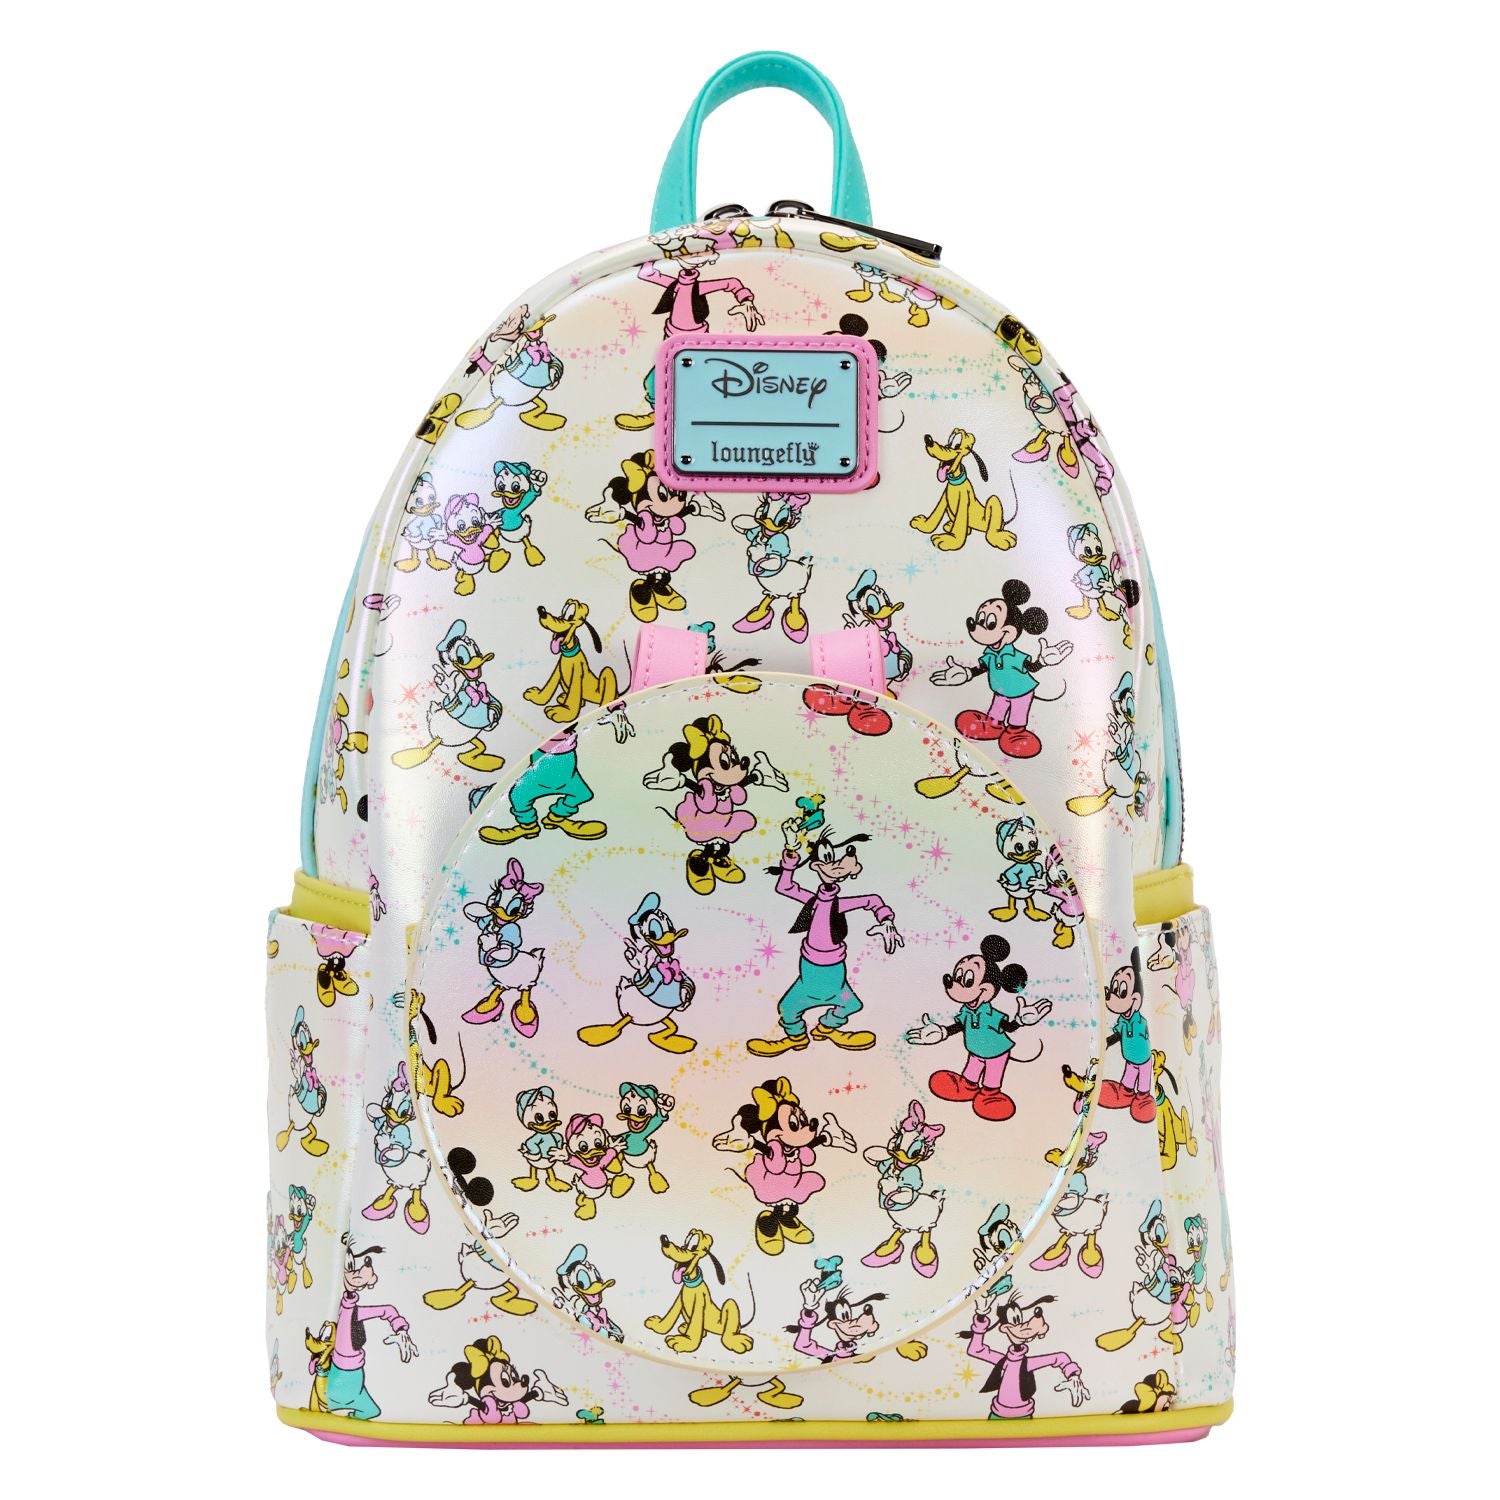 Loungefly Disney Exclusive Devil Donald Duck Mini Backpack NEW IN STOCK